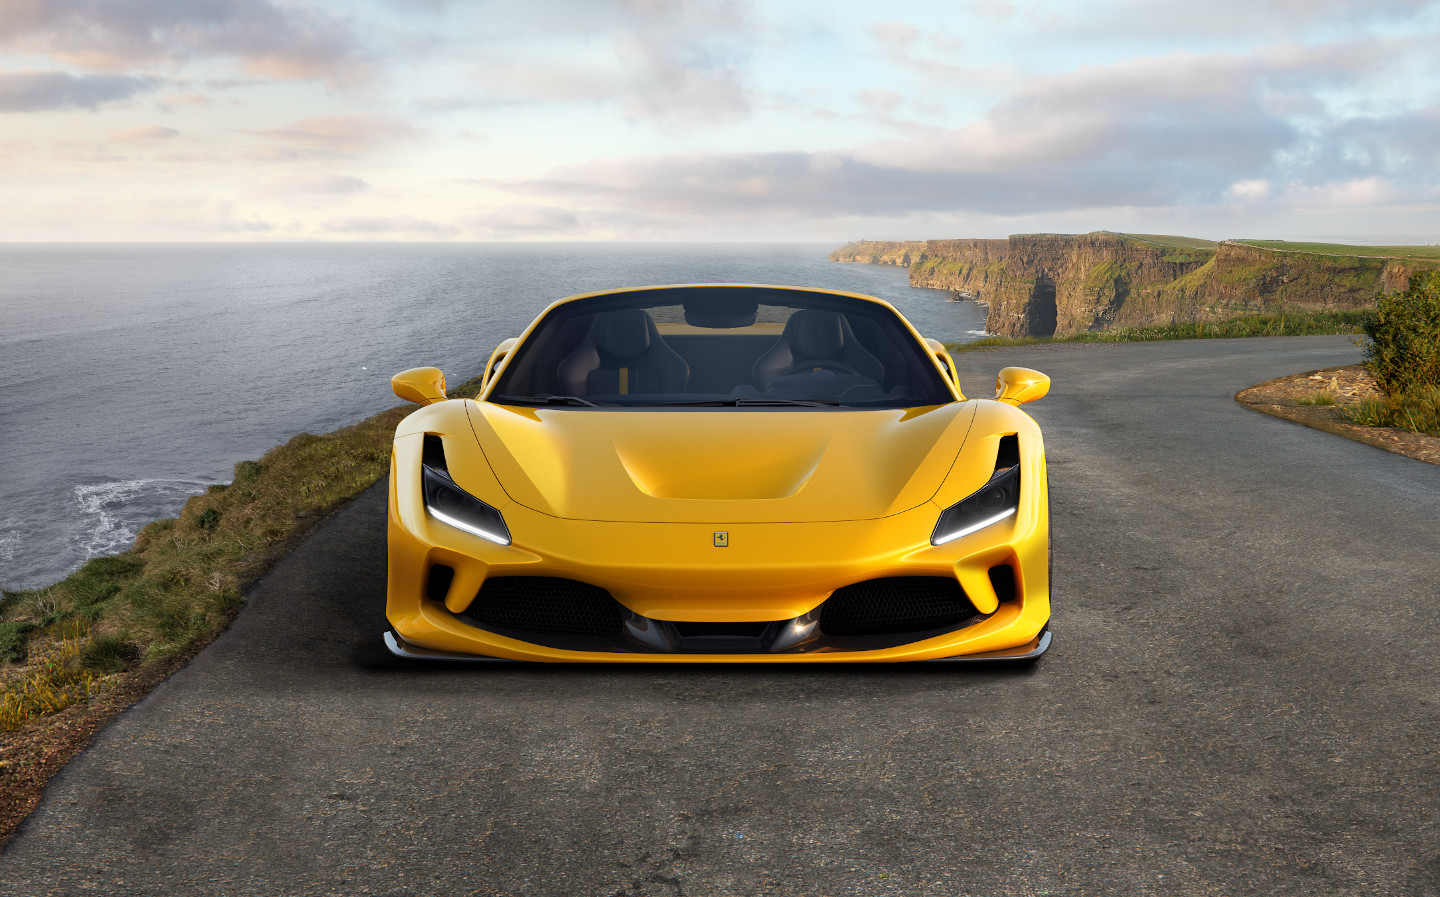 James May: Yellow Ferraris are still cool, right?